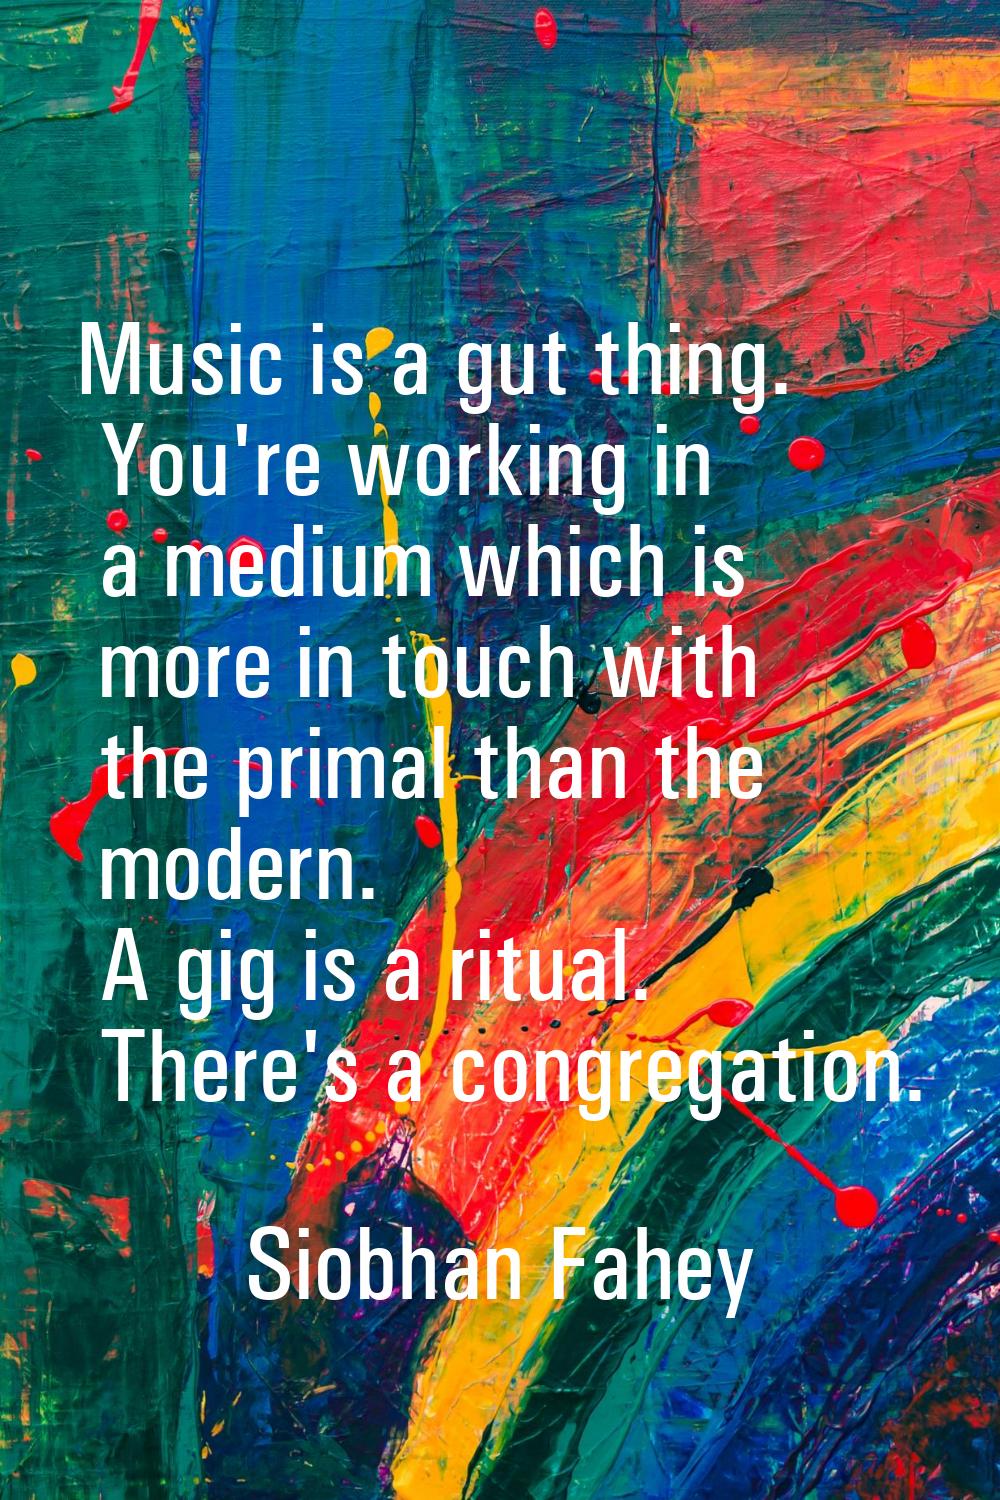 Music is a gut thing. You're working in a medium which is more in touch with the primal than the mo